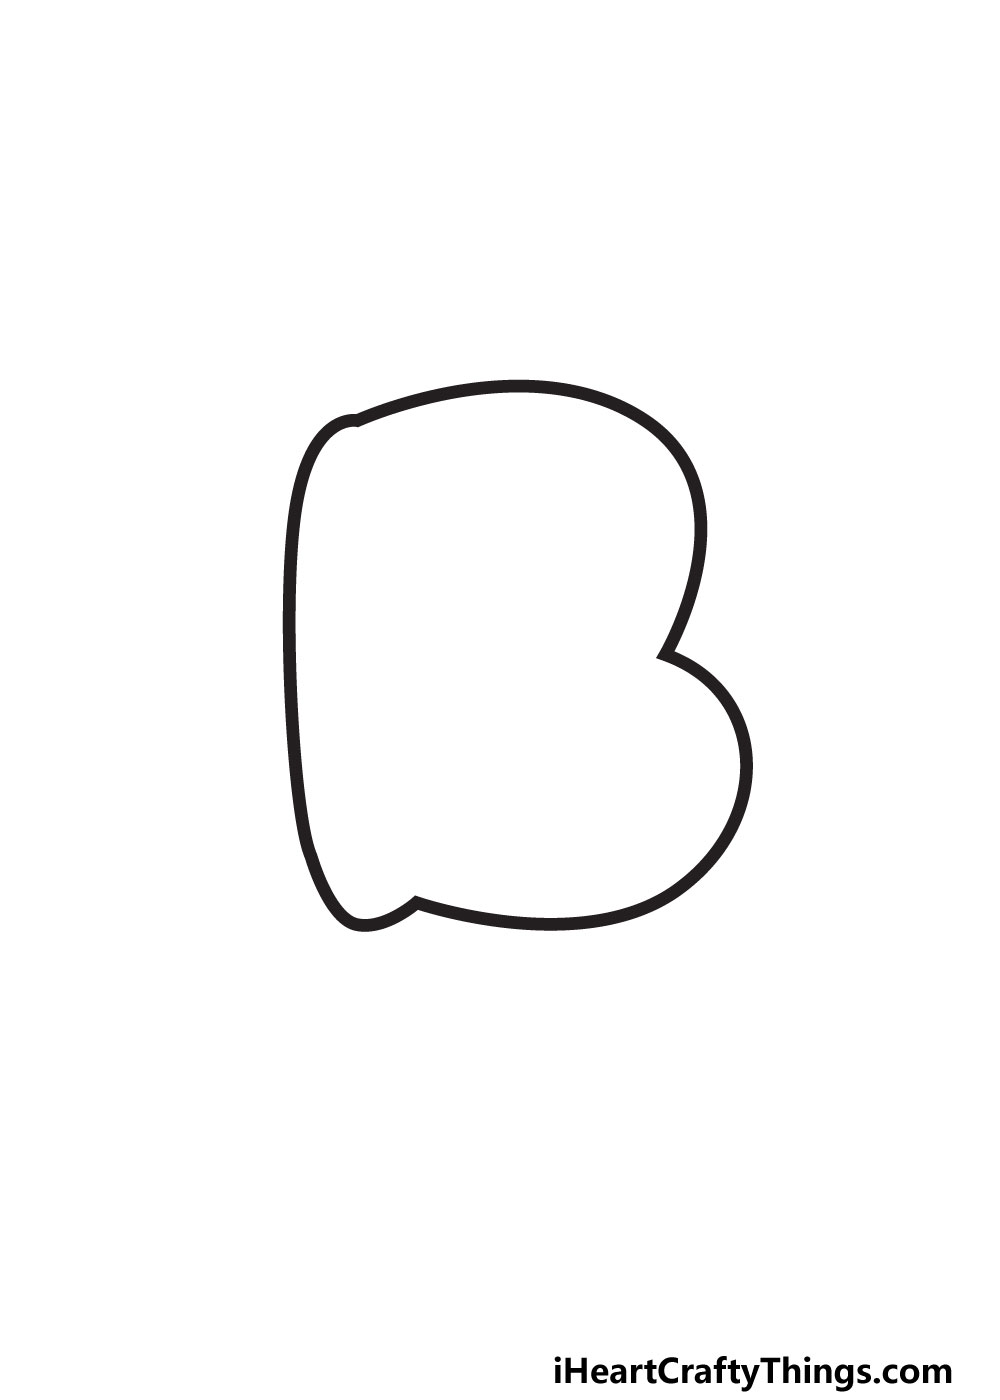 How To Draw Your Own Bubble B step 3